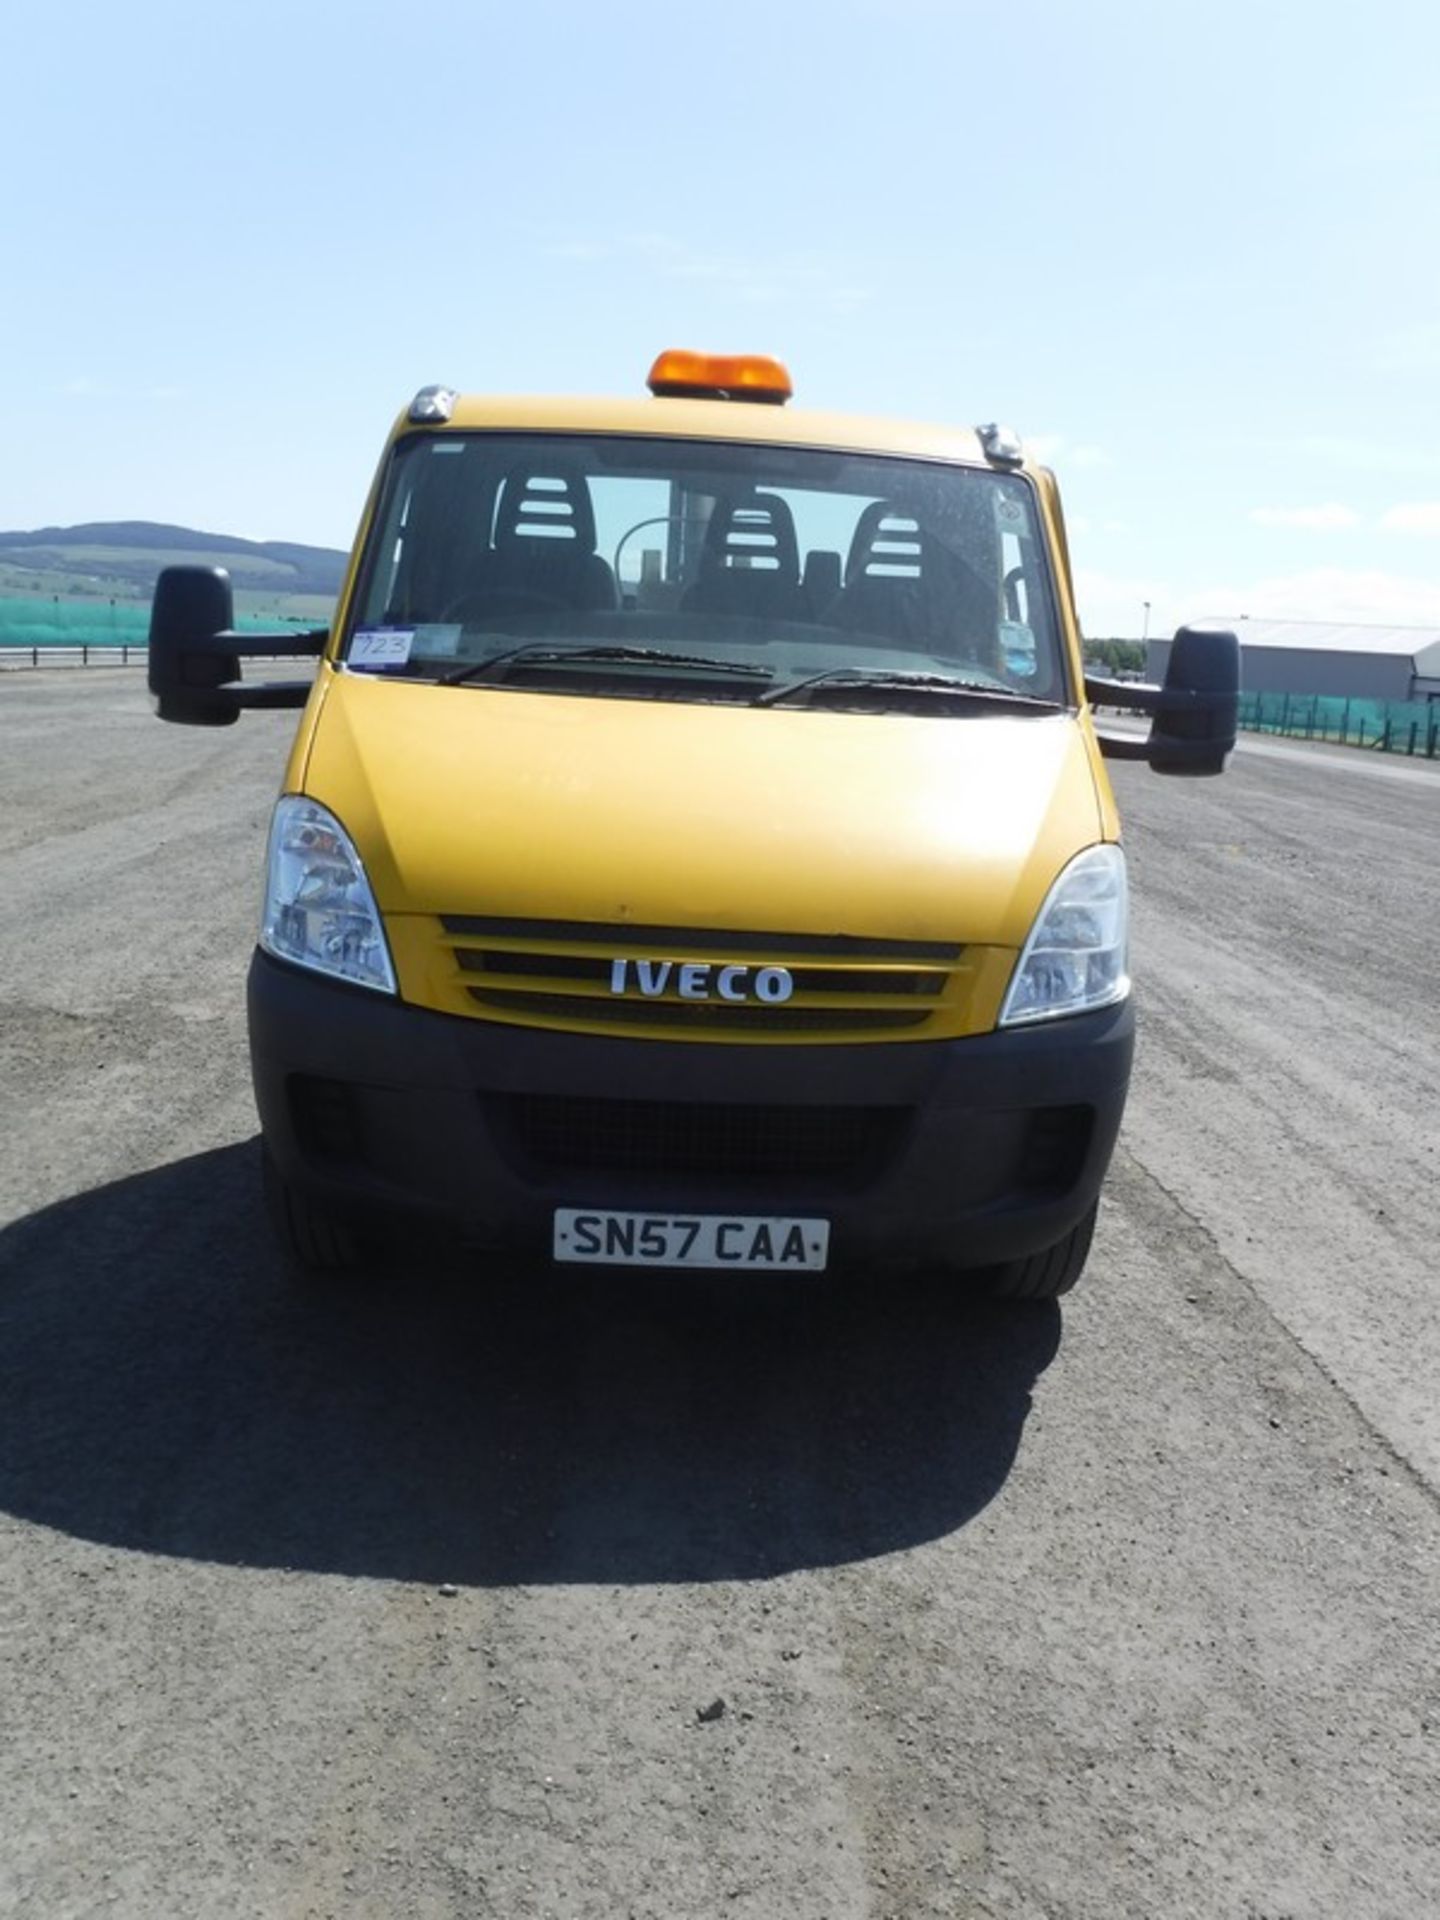 IVECO DAILY 65C18 - 2998cc - Image 17 of 30